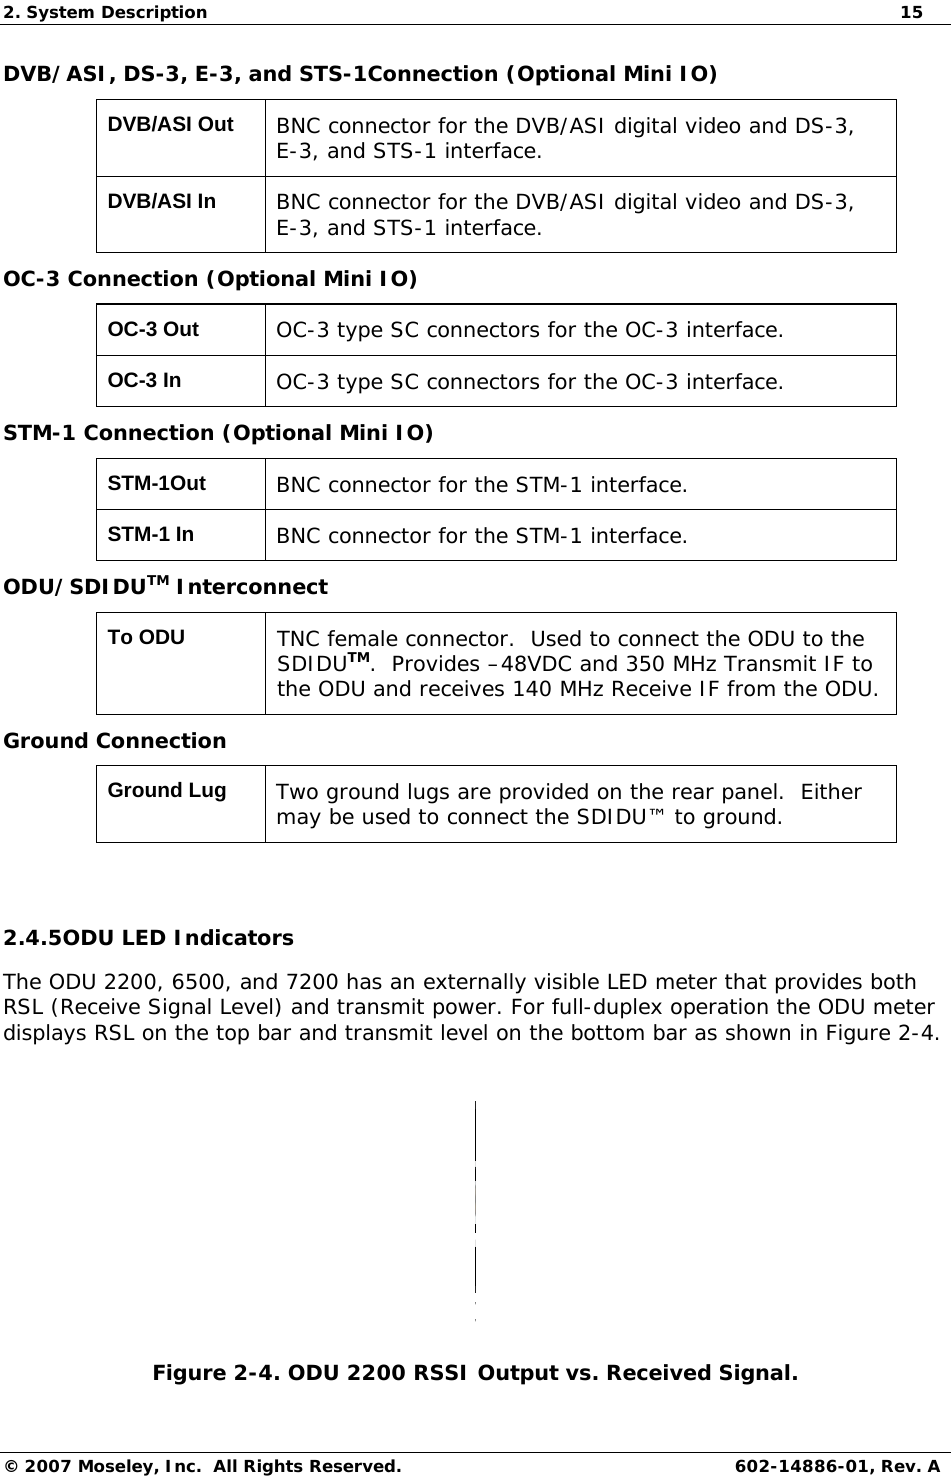 2. System Description  15 © 2007 Moseley, Inc.  All Rights Reserved. 602-14886-01, Rev. A DVB/ASI, DS-3, E-3, and STS-1Connection (Optional Mini IO) DVB/ASI Out  BNC connector for the DVB/ASI digital video and DS-3, E-3, and STS-1 interface. DVB/ASI In  BNC connector for the DVB/ASI digital video and DS-3, E-3, and STS-1 interface. OC-3 Connection (Optional Mini IO) OC-3 Out  OC-3 type SC connectors for the OC-3 interface. OC-3 In  OC-3 type SC connectors for the OC-3 interface. STM-1 Connection (Optional Mini IO) STM-1Out  BNC connector for the STM-1 interface. STM-1 In  BNC connector for the STM-1 interface. ODU/SDIDUTM Interconnect To ODU  TNC female connector.  Used to connect the ODU to the SDIDUTM.  Provides –48VDC and 350 MHz Transmit IF to the ODU and receives 140 MHz Receive IF from the ODU. Ground Connection Ground Lug  Two ground lugs are provided on the rear panel.  Either may be used to connect the SDIDU™ to ground.  2.4.5ODU LED Indicators The ODU 2200, 6500, and 7200 has an externally visible LED meter that provides both RSL (Receive Signal Level) and transmit power. For full-duplex operation the ODU meter displays RSL on the top bar and transmit level on the bottom bar as shown in Figure 2-4.  xwww Figure 2-4. ODU 2200 RSSI Output vs. Received Signal.  